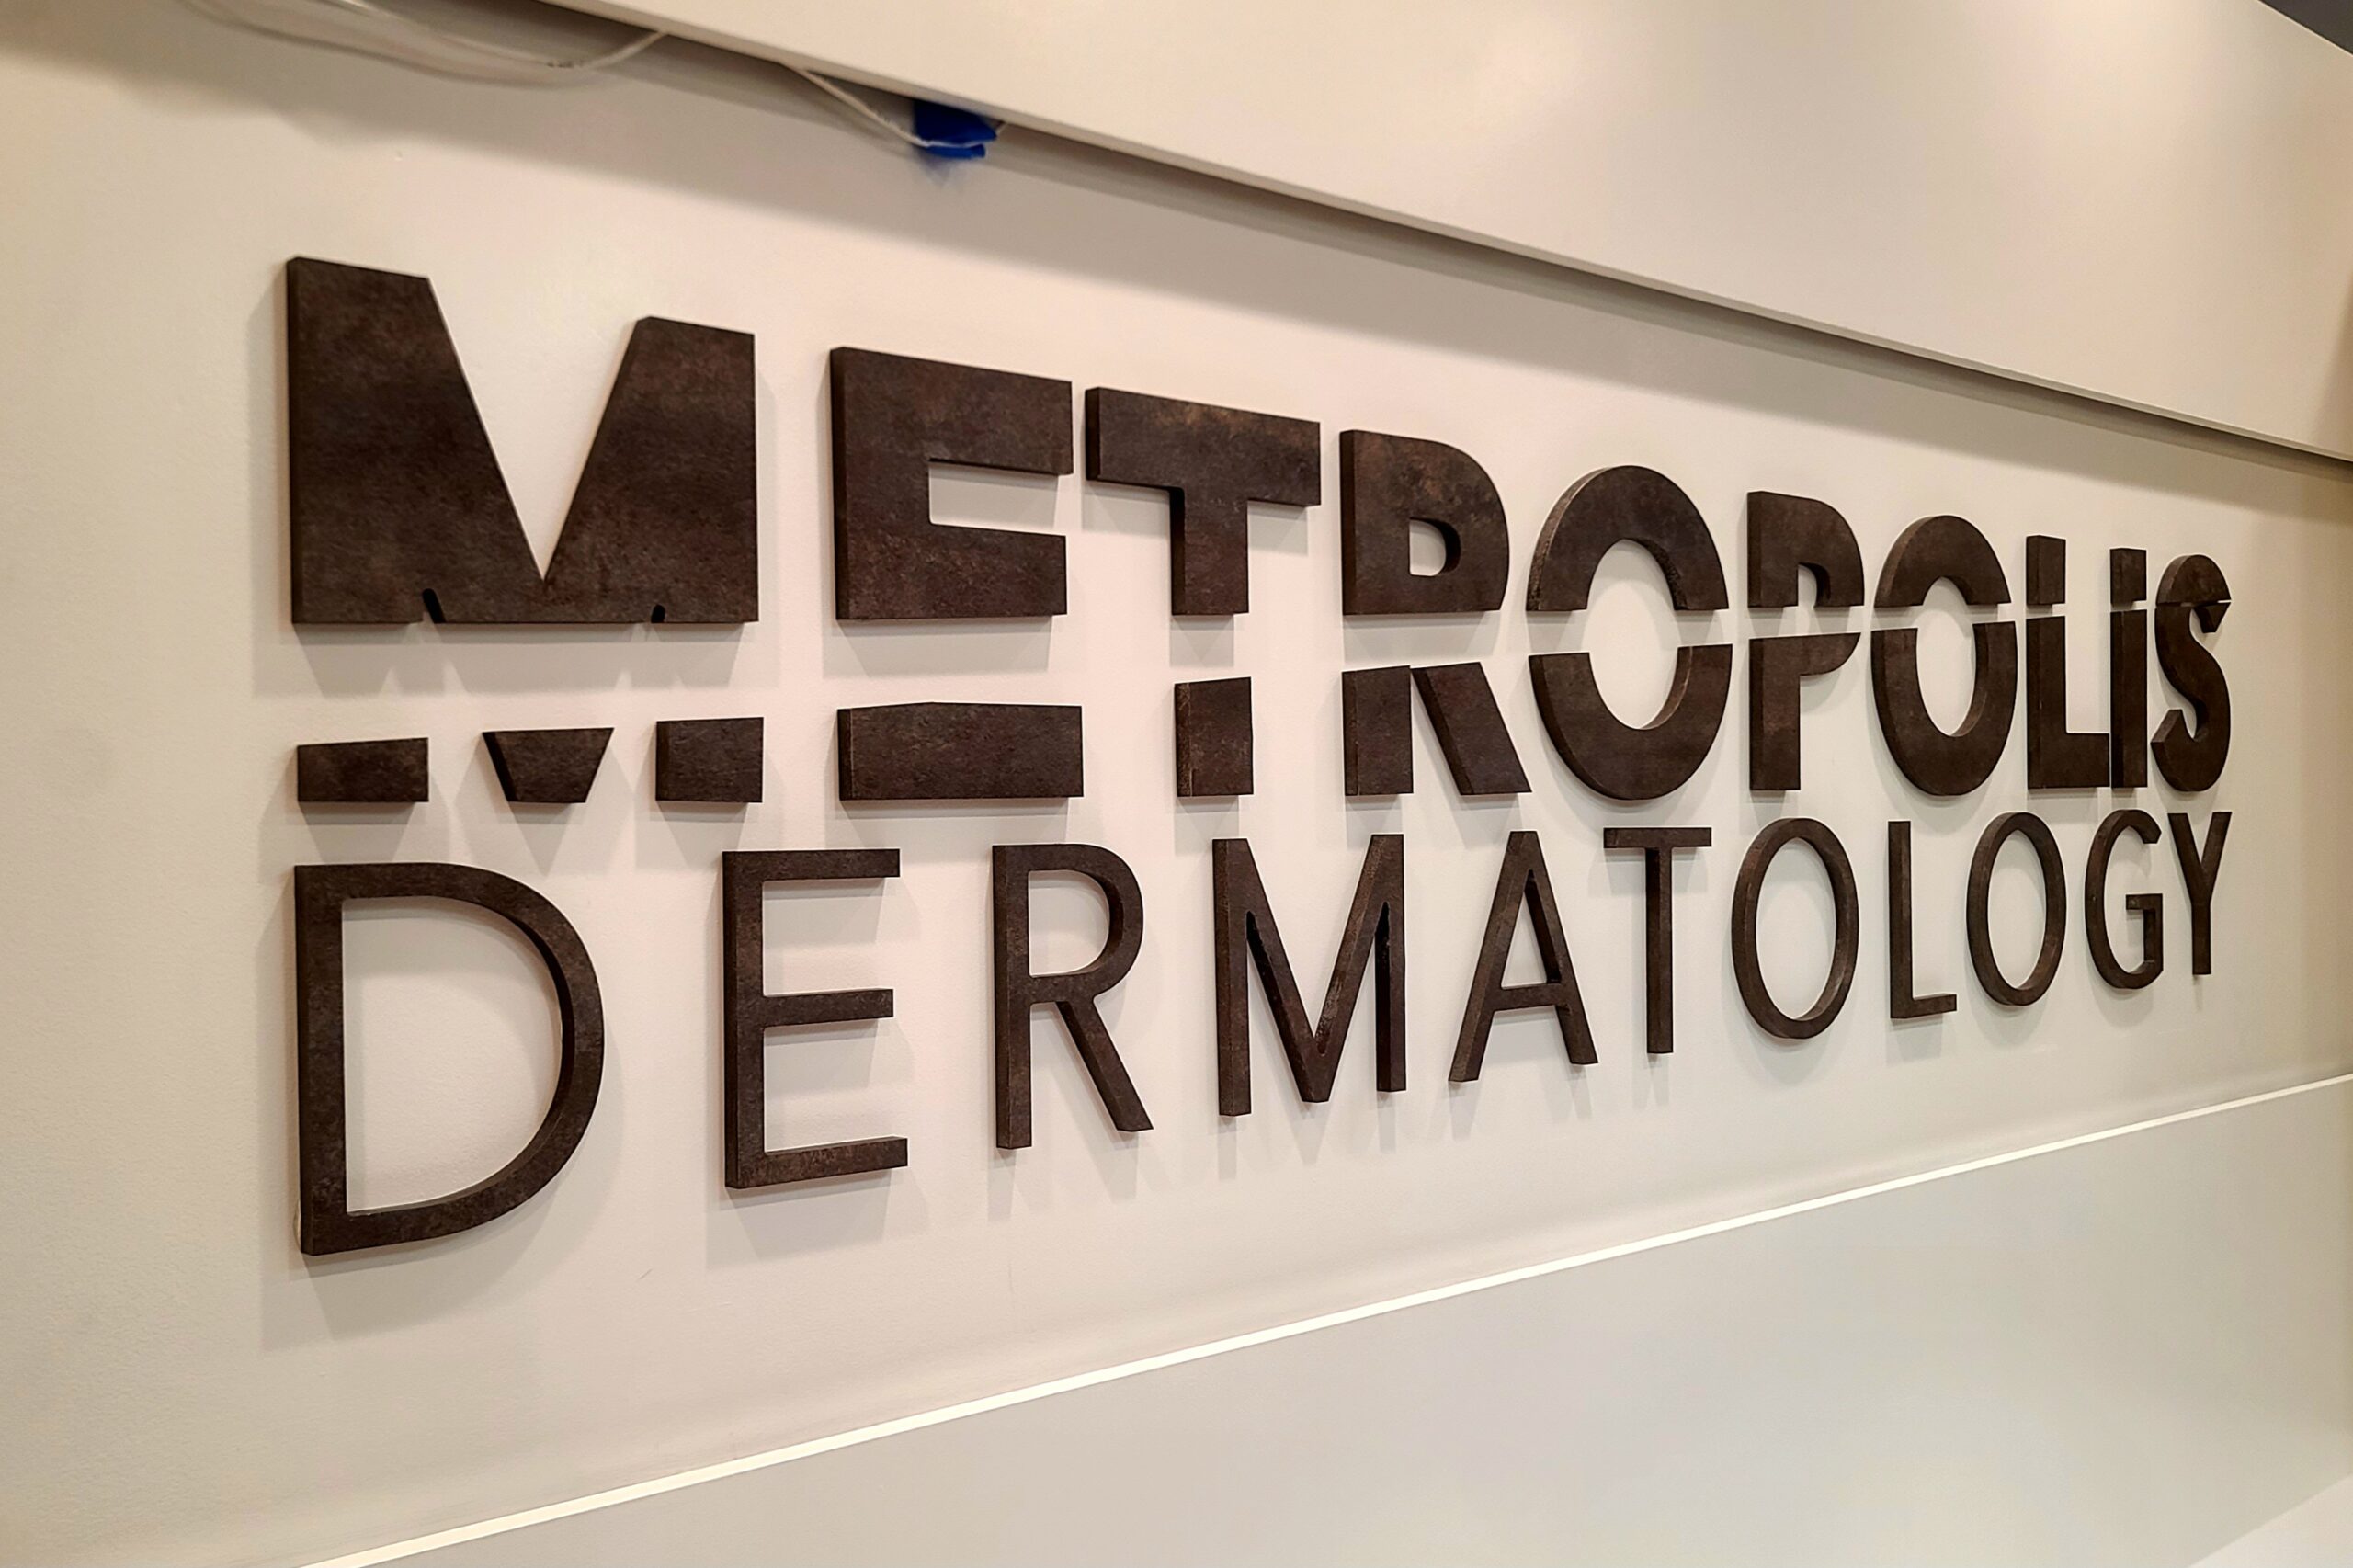 You are currently viewing Metropolis Dermatology Lobby Sign Costa Mesa